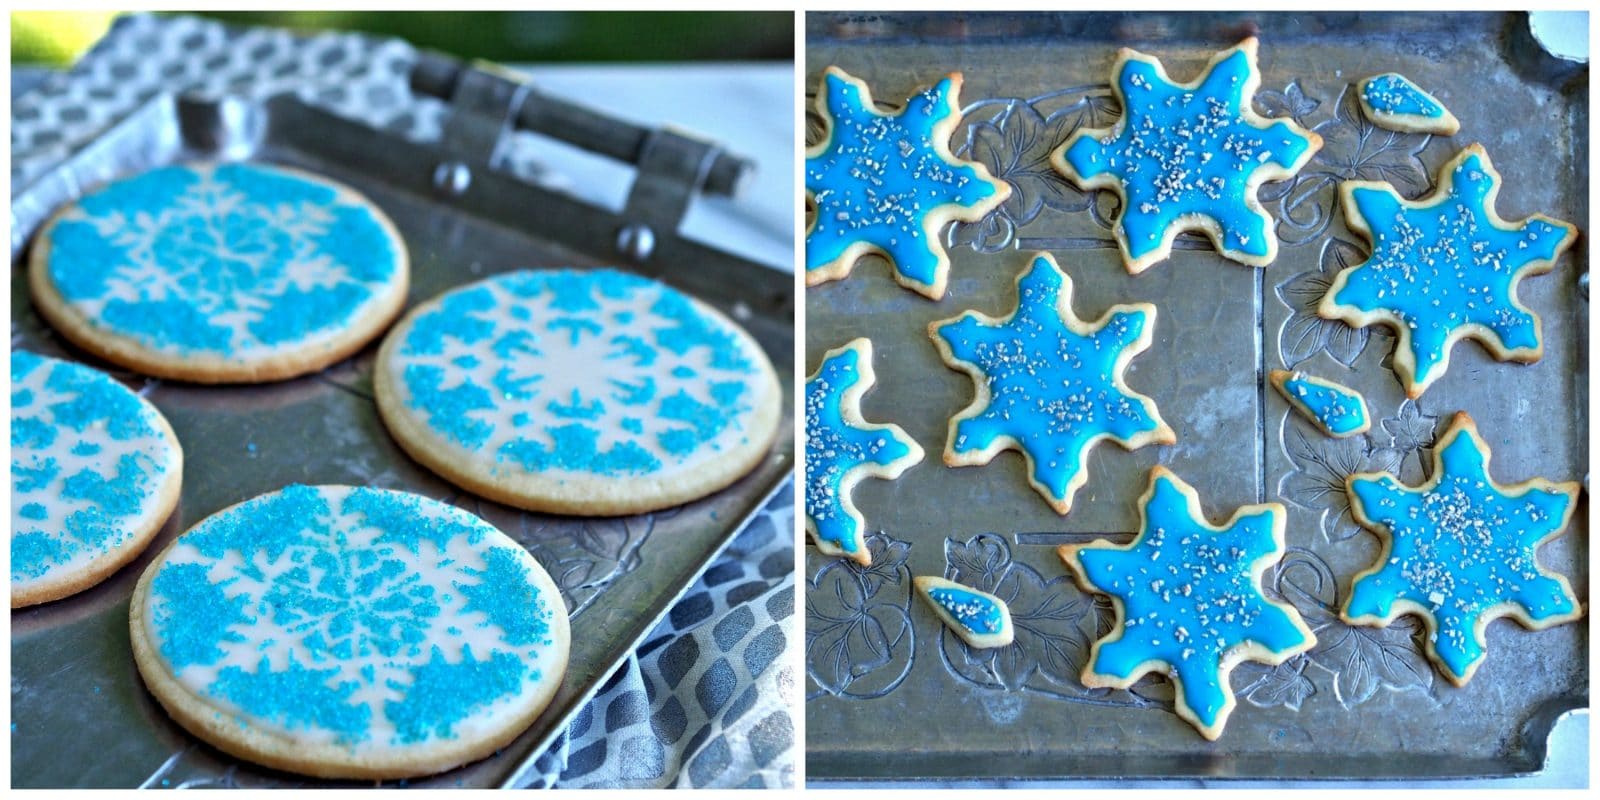 Snowflake Cookies - Using stencil ornaments, any decorated cookie can be turned into a work of art. simplysated